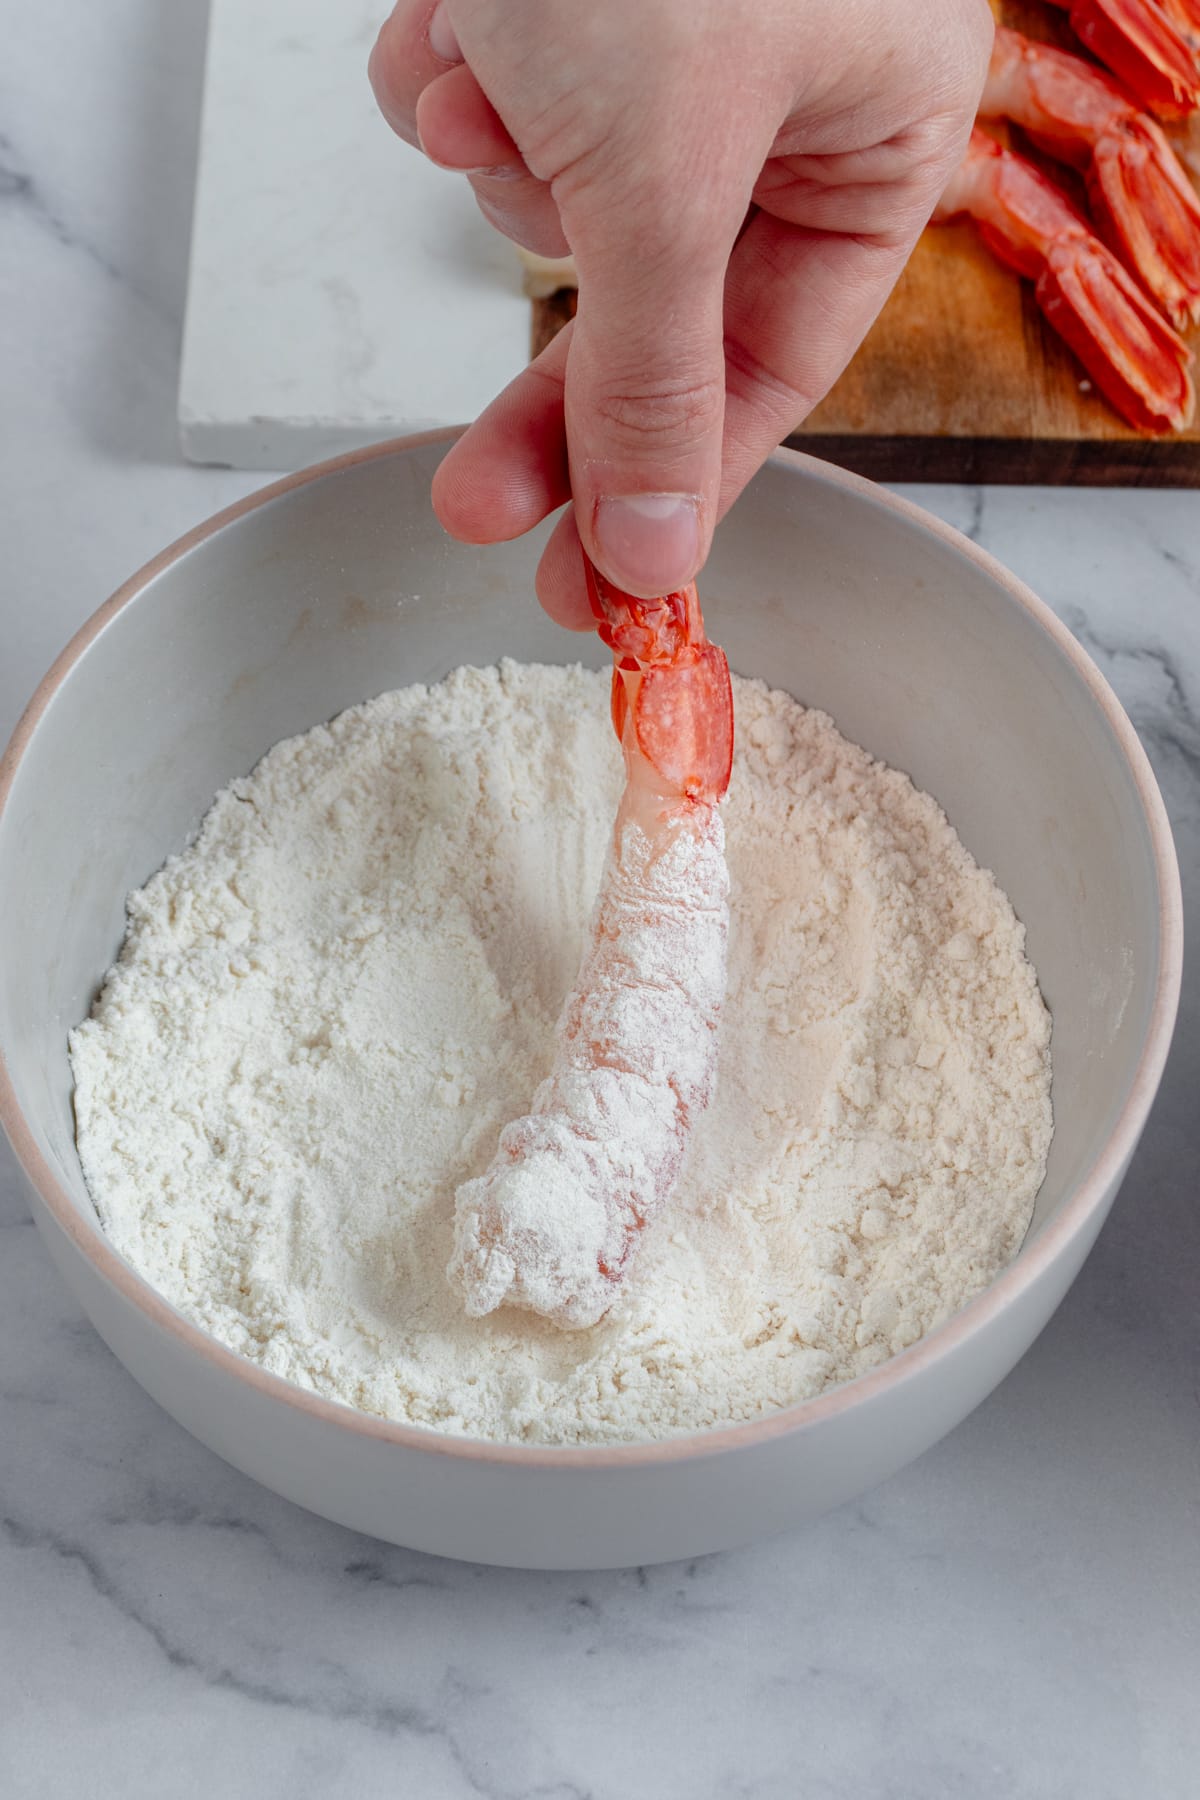 Shrimp being coated in all-purpose flour.